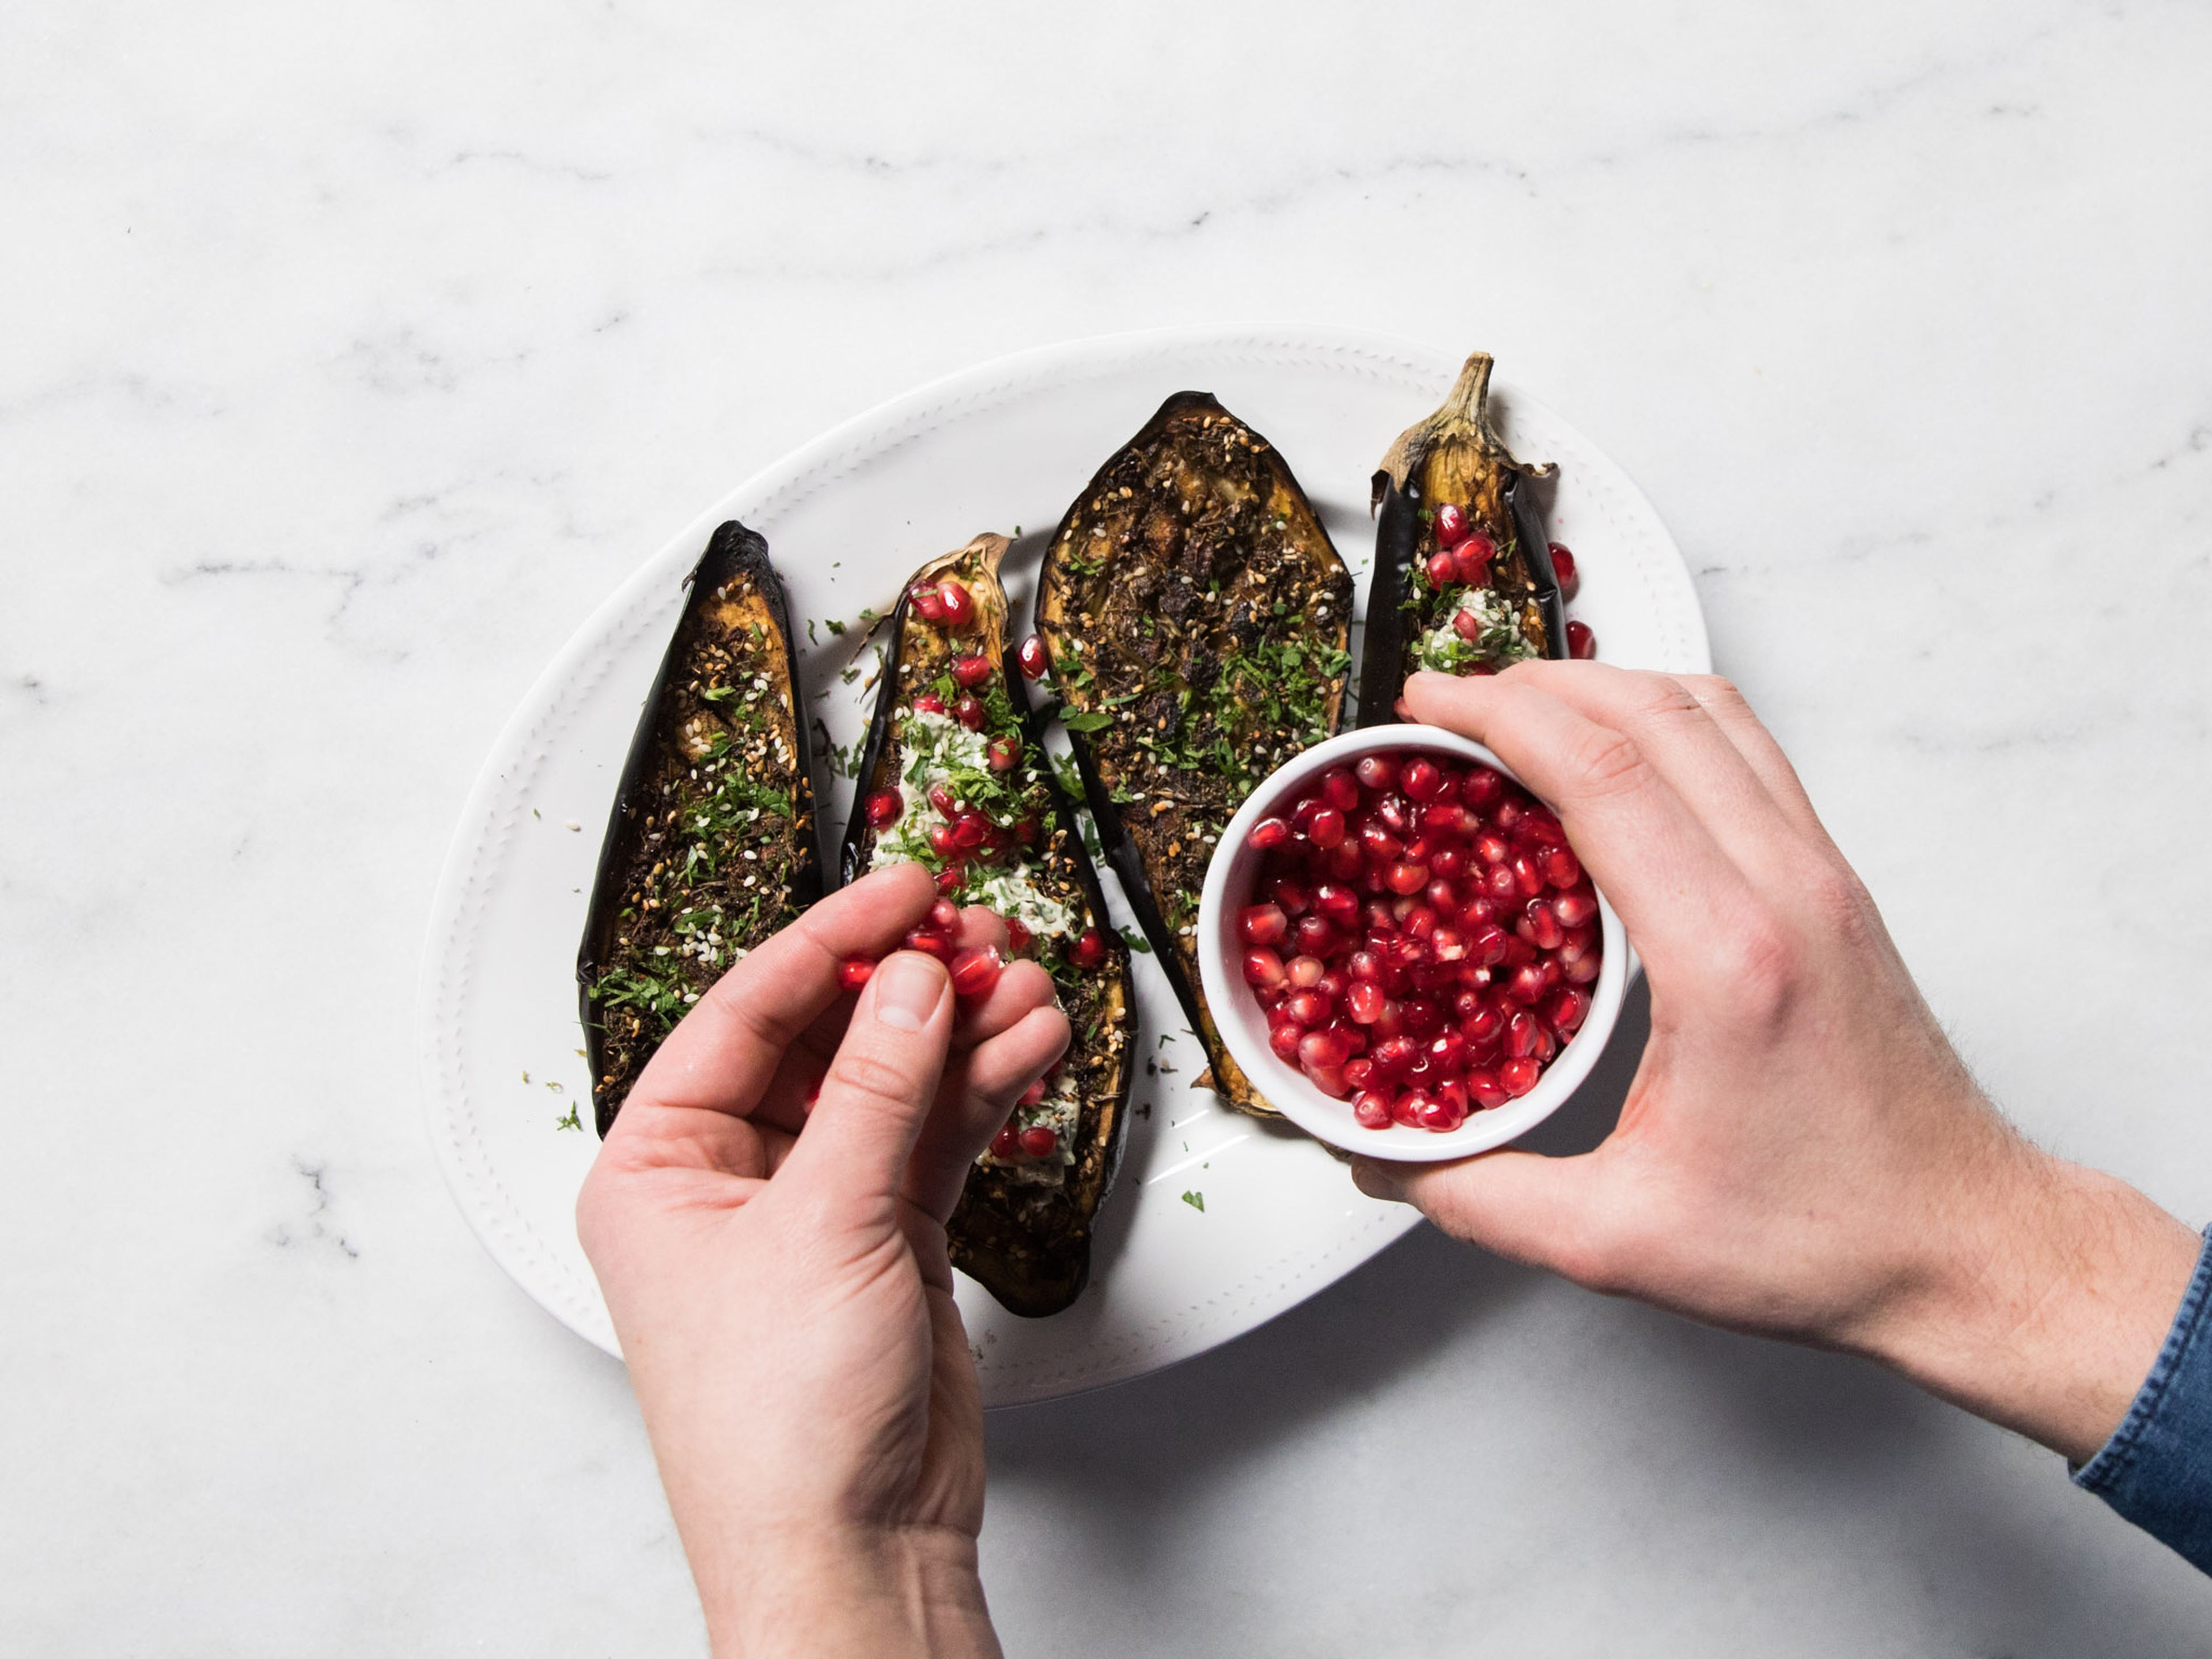 Remove roasted eggplants from the oven and serve with tahini dip. Garnish with pomegranate seeds, fresh parsley, mint, and sesame seeds. Enjoy!